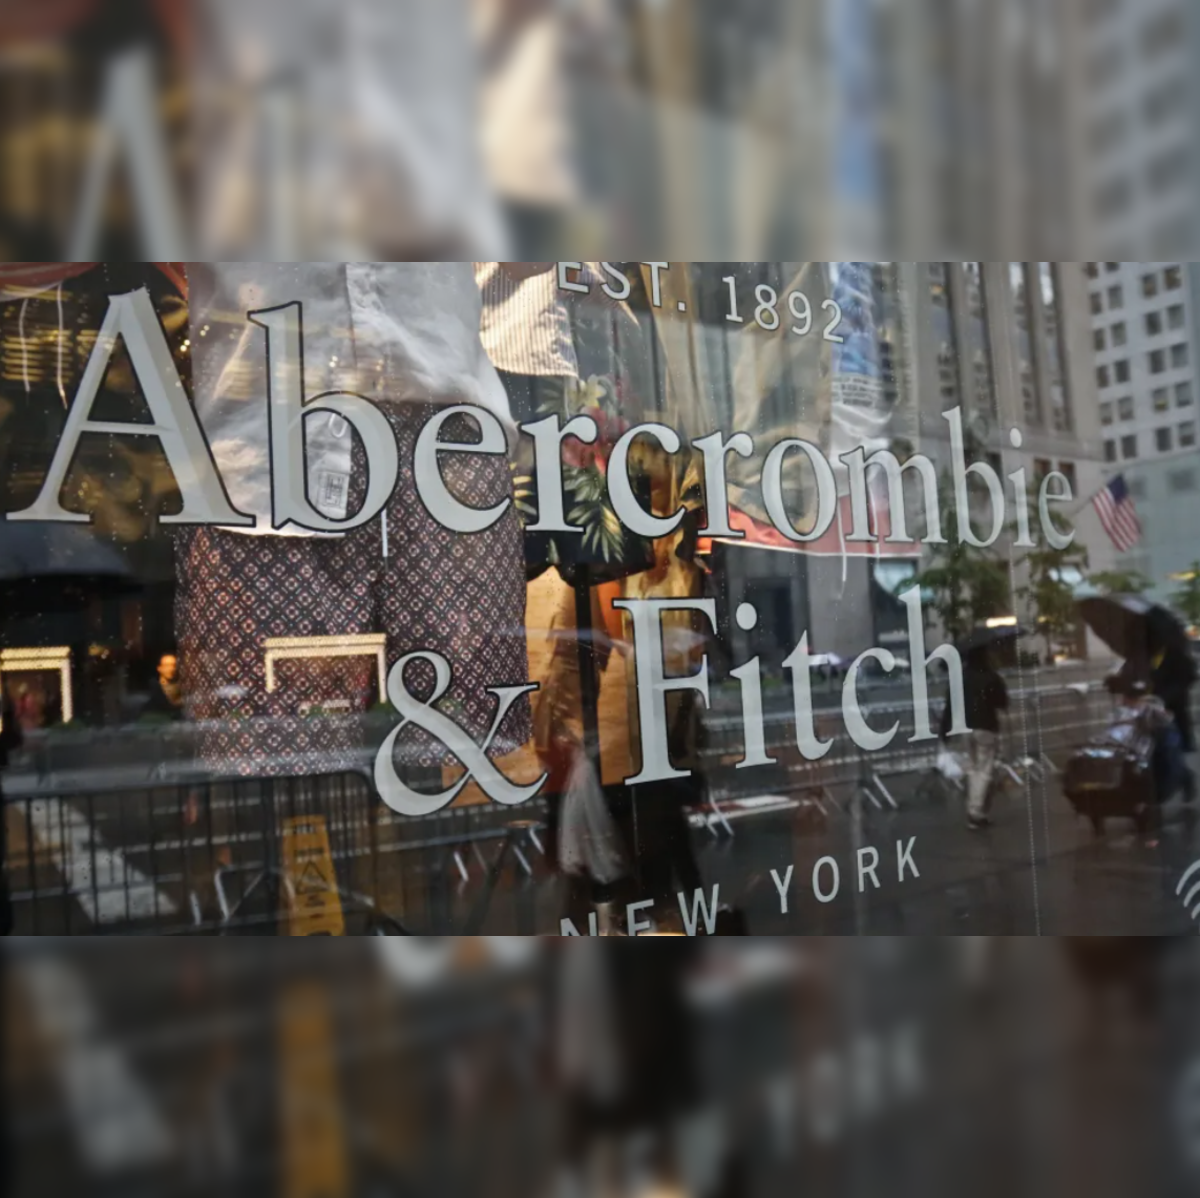 abercrombie: Abercrombie & Fitch: When was it founded